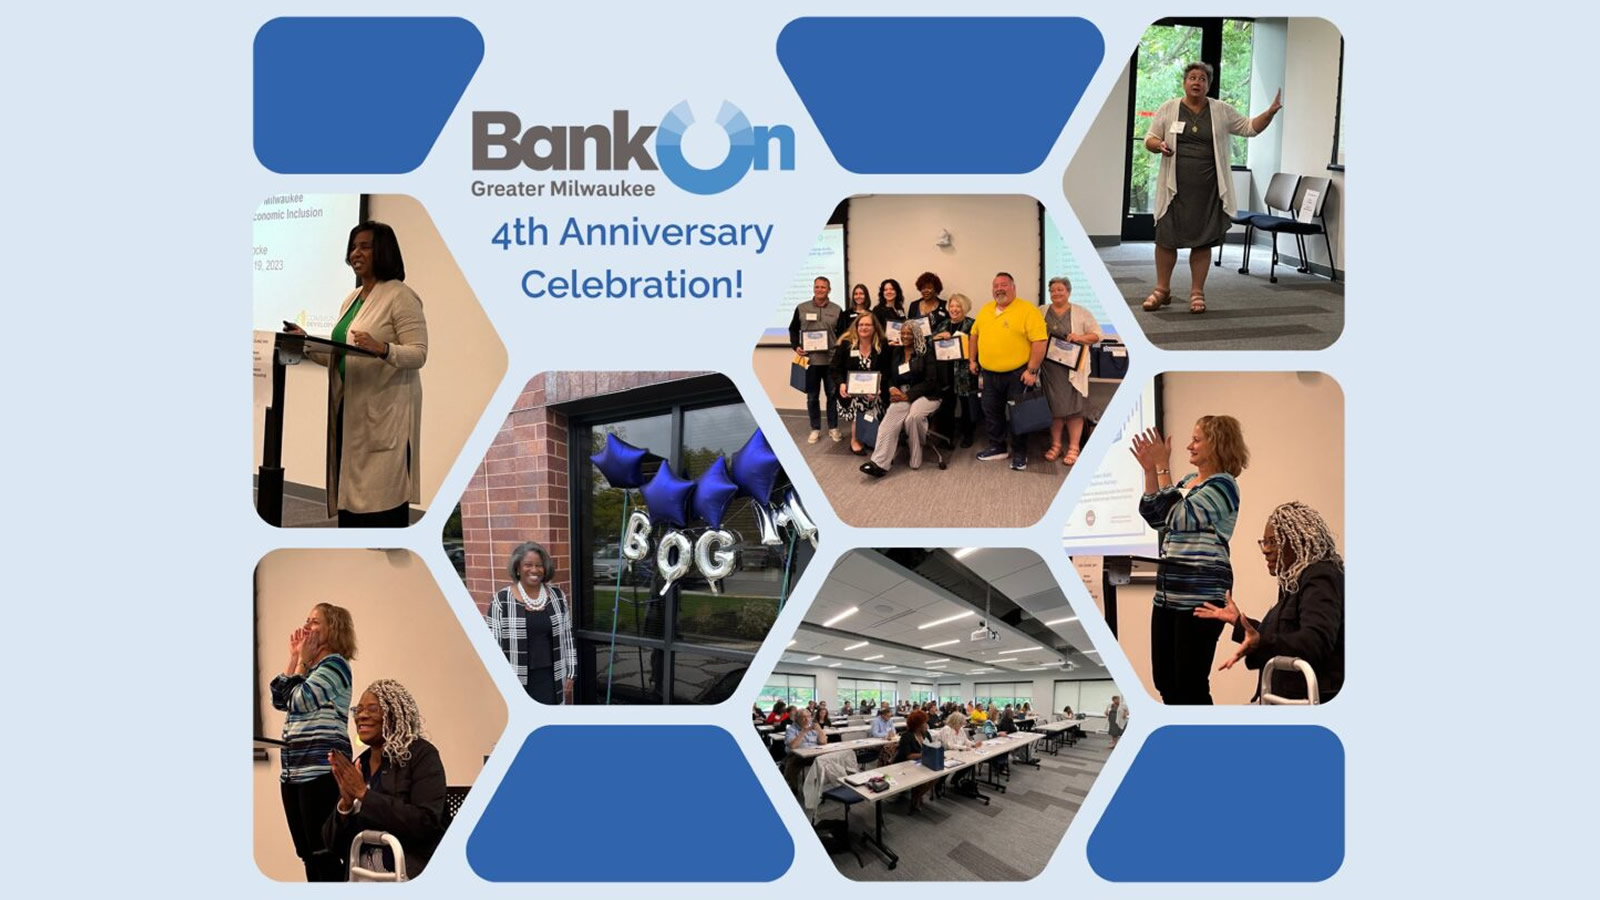 Thank you to the 40+ people from the Bank On Greater Milwaukee coalition and Milwaukee Alliance for Economic Alliance (AEI) who joined us to celebrate our 4th anniversary on Tuesday, September 19.